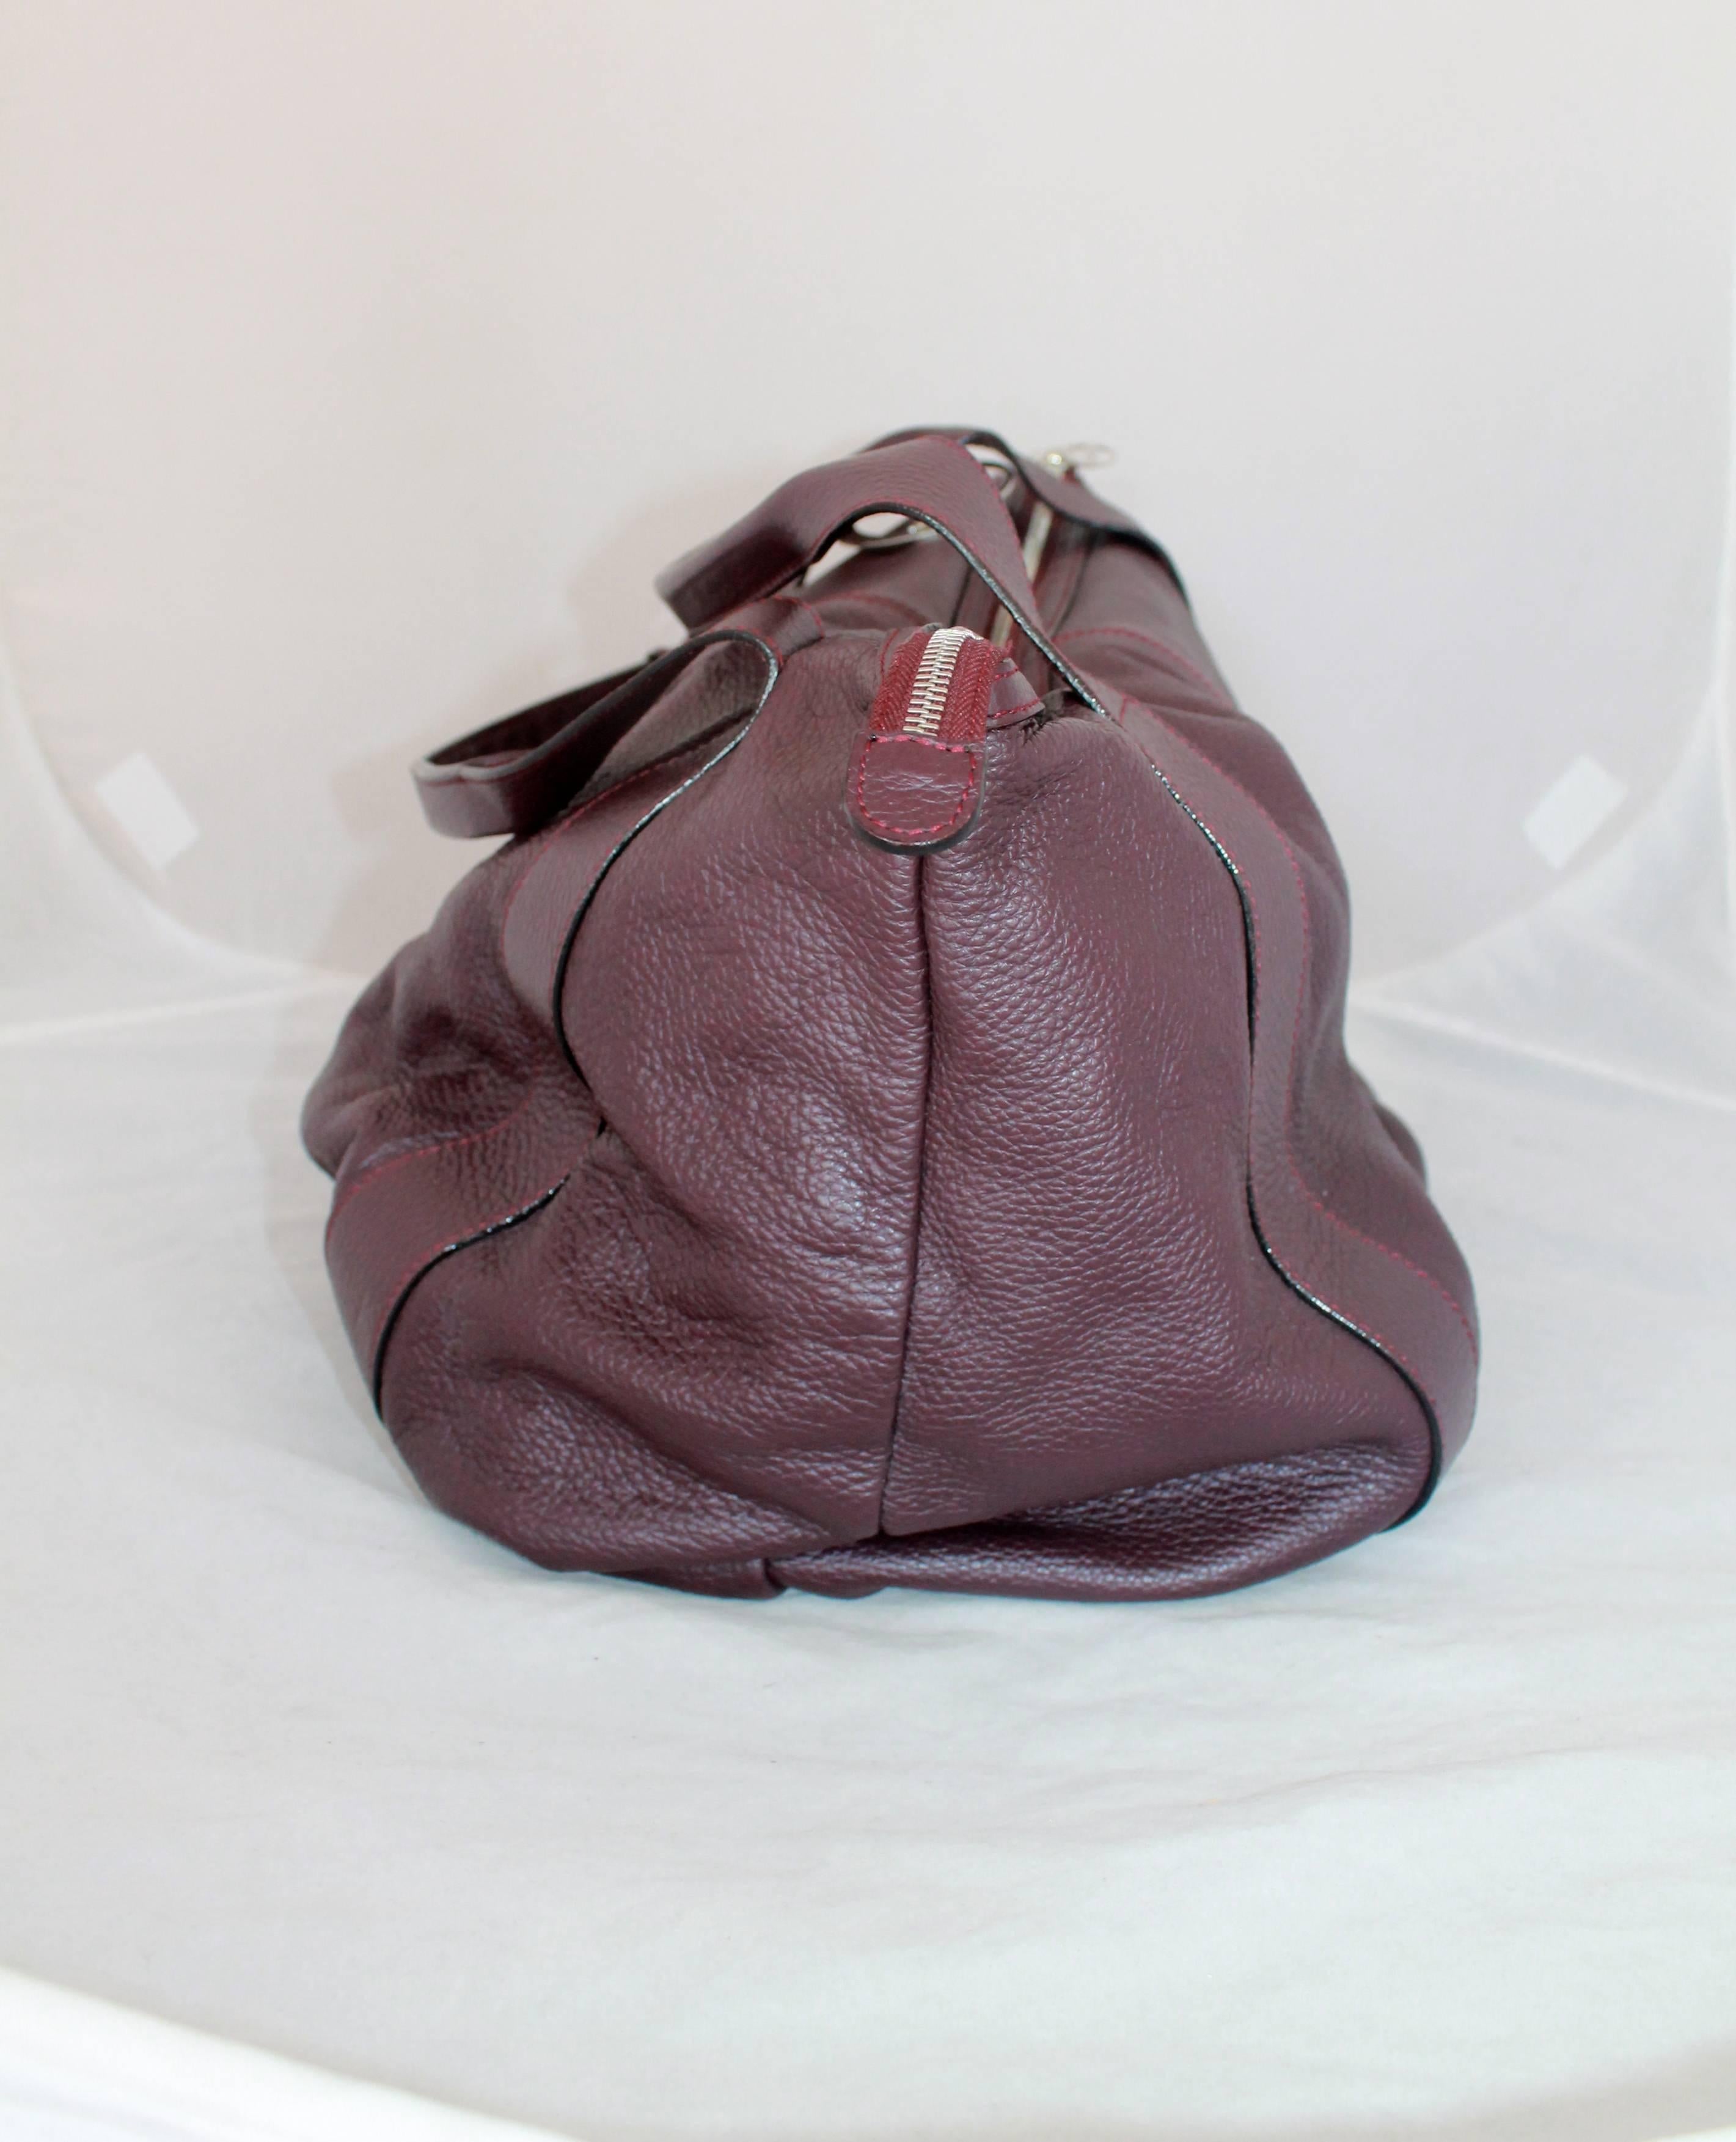 A. Testoni Eggplant Deerskin Leather Shoulder Bag - SHW. This bag is in excellent condition and comes with a duster. 

Measurements:
Height- 12.5